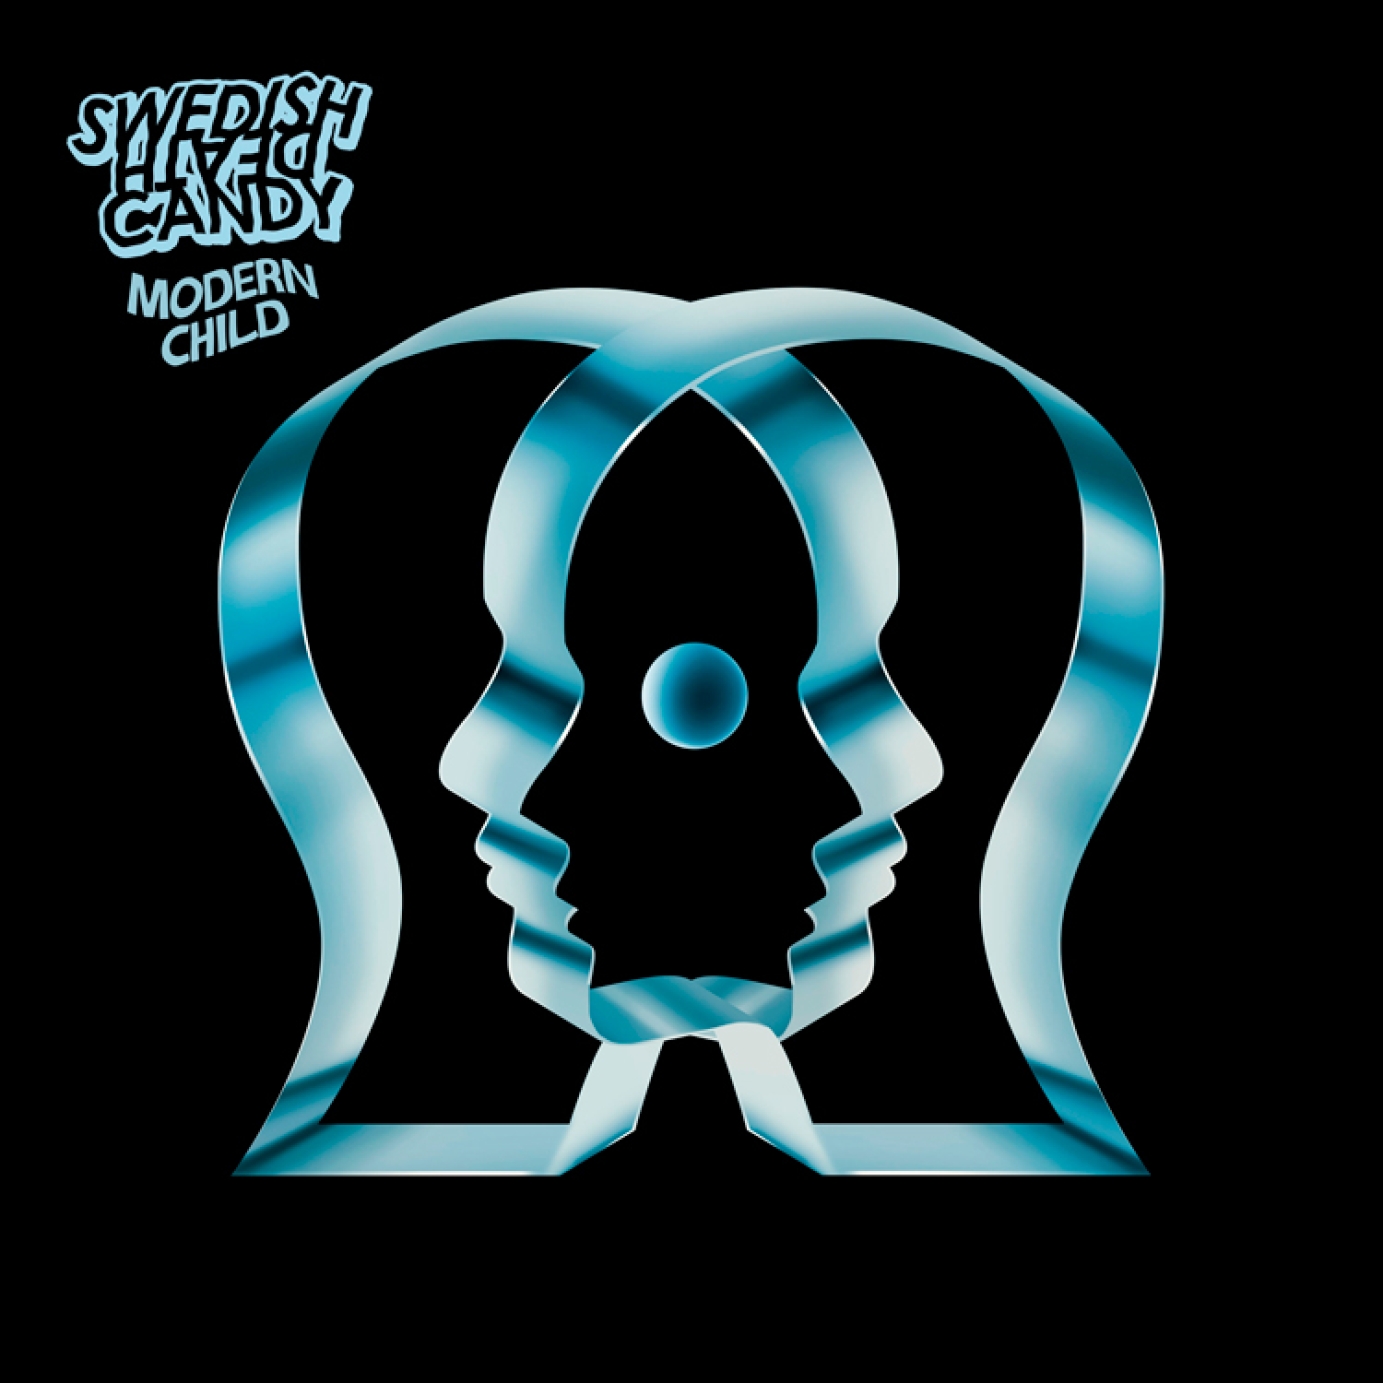 Artwork for Swedish Death Candy by jack crossing